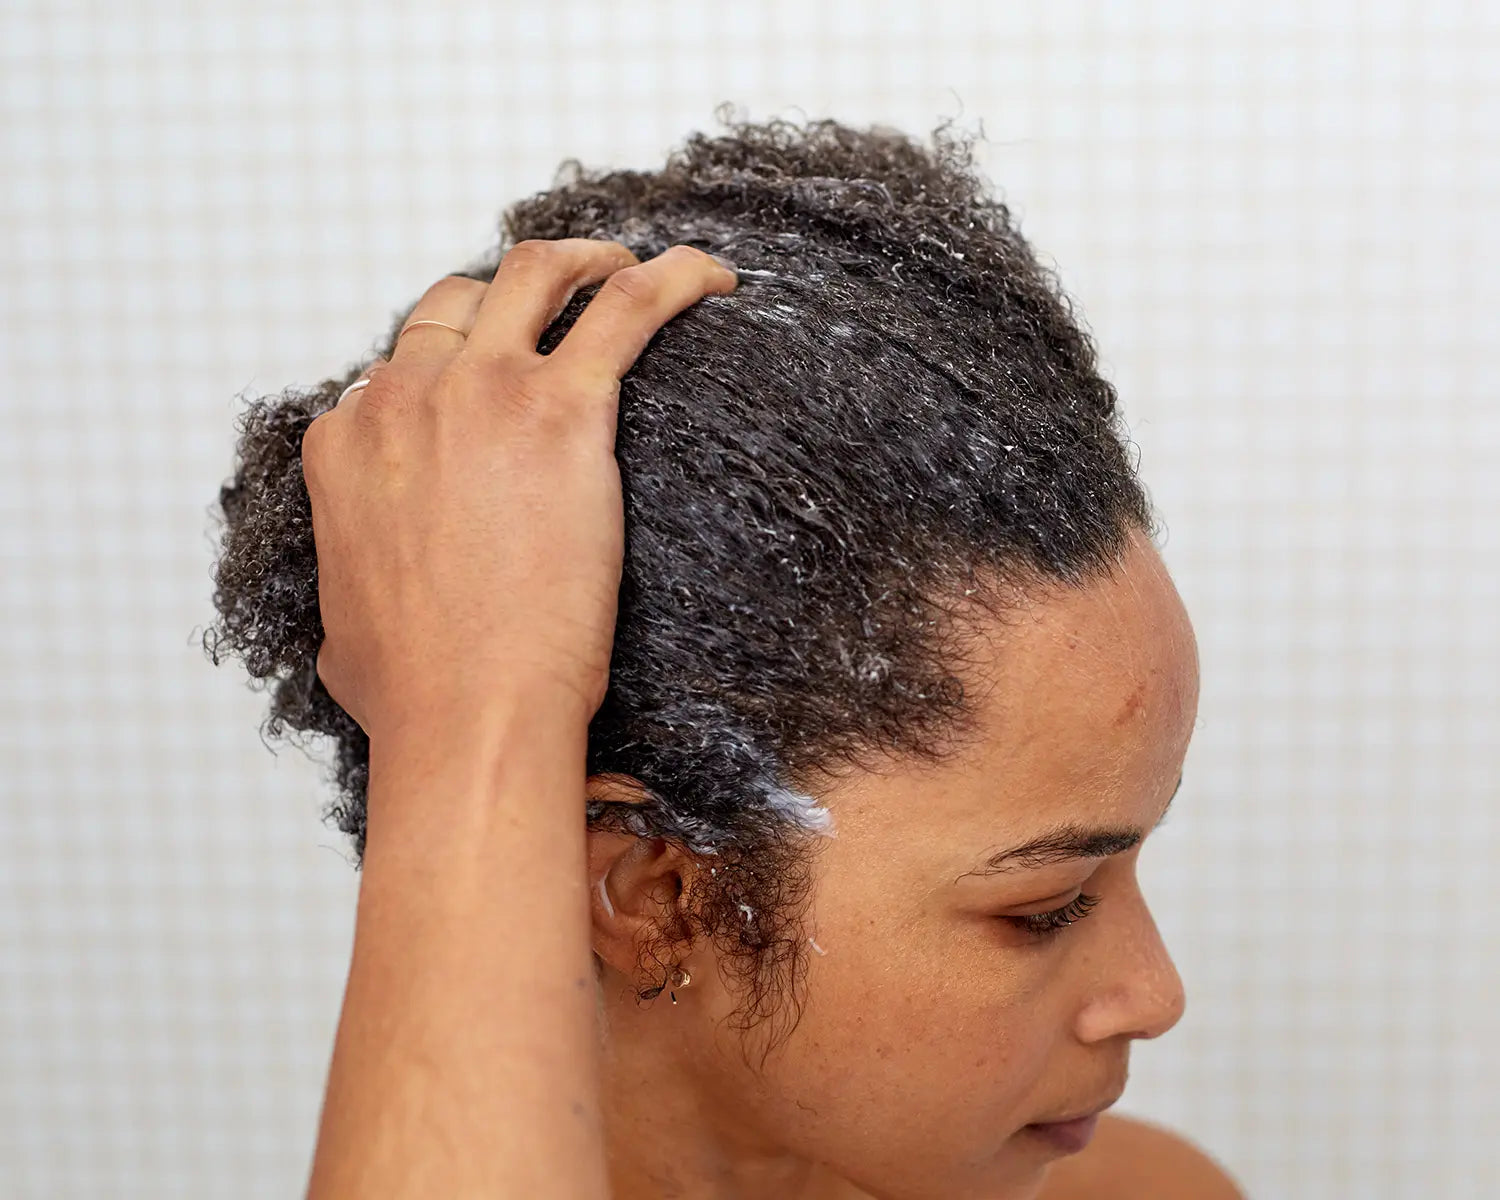 How to Care for Coarse Hair and Make It Soft and Silky